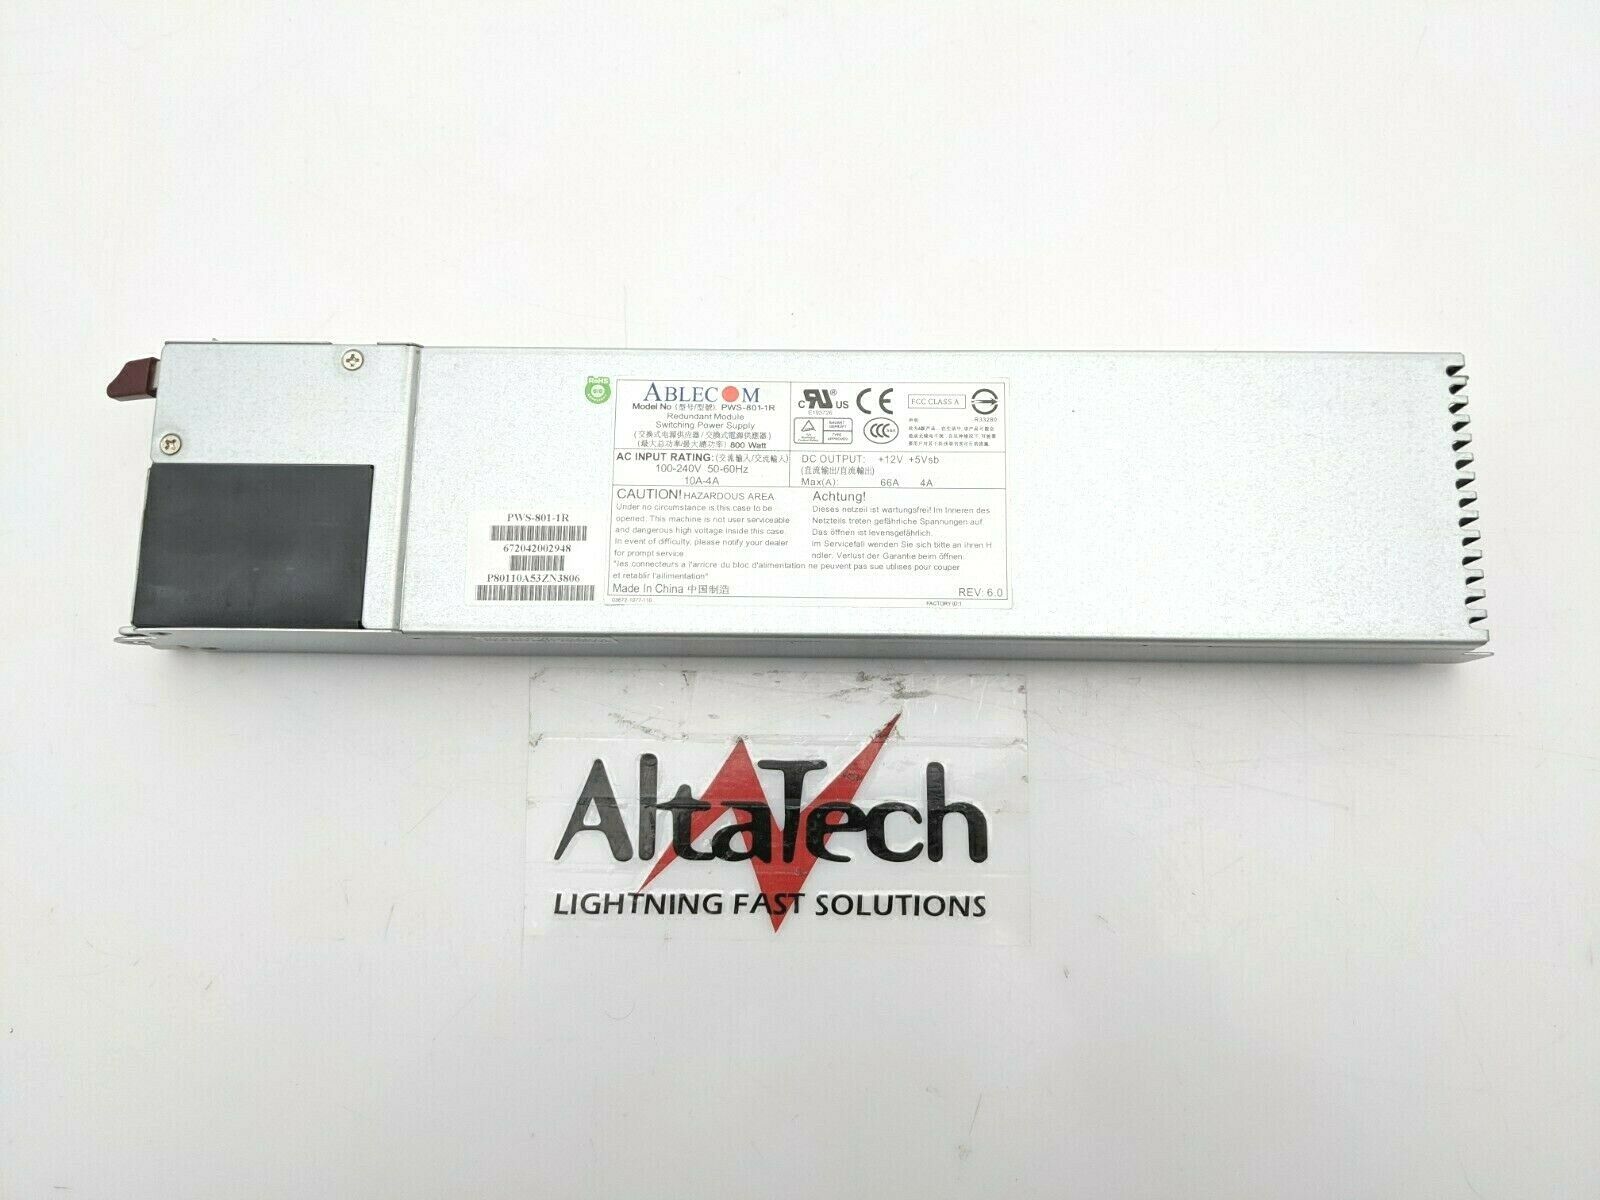 SuperMicro PWS-801-1R 800 W Hot Swap Power Supply, Used